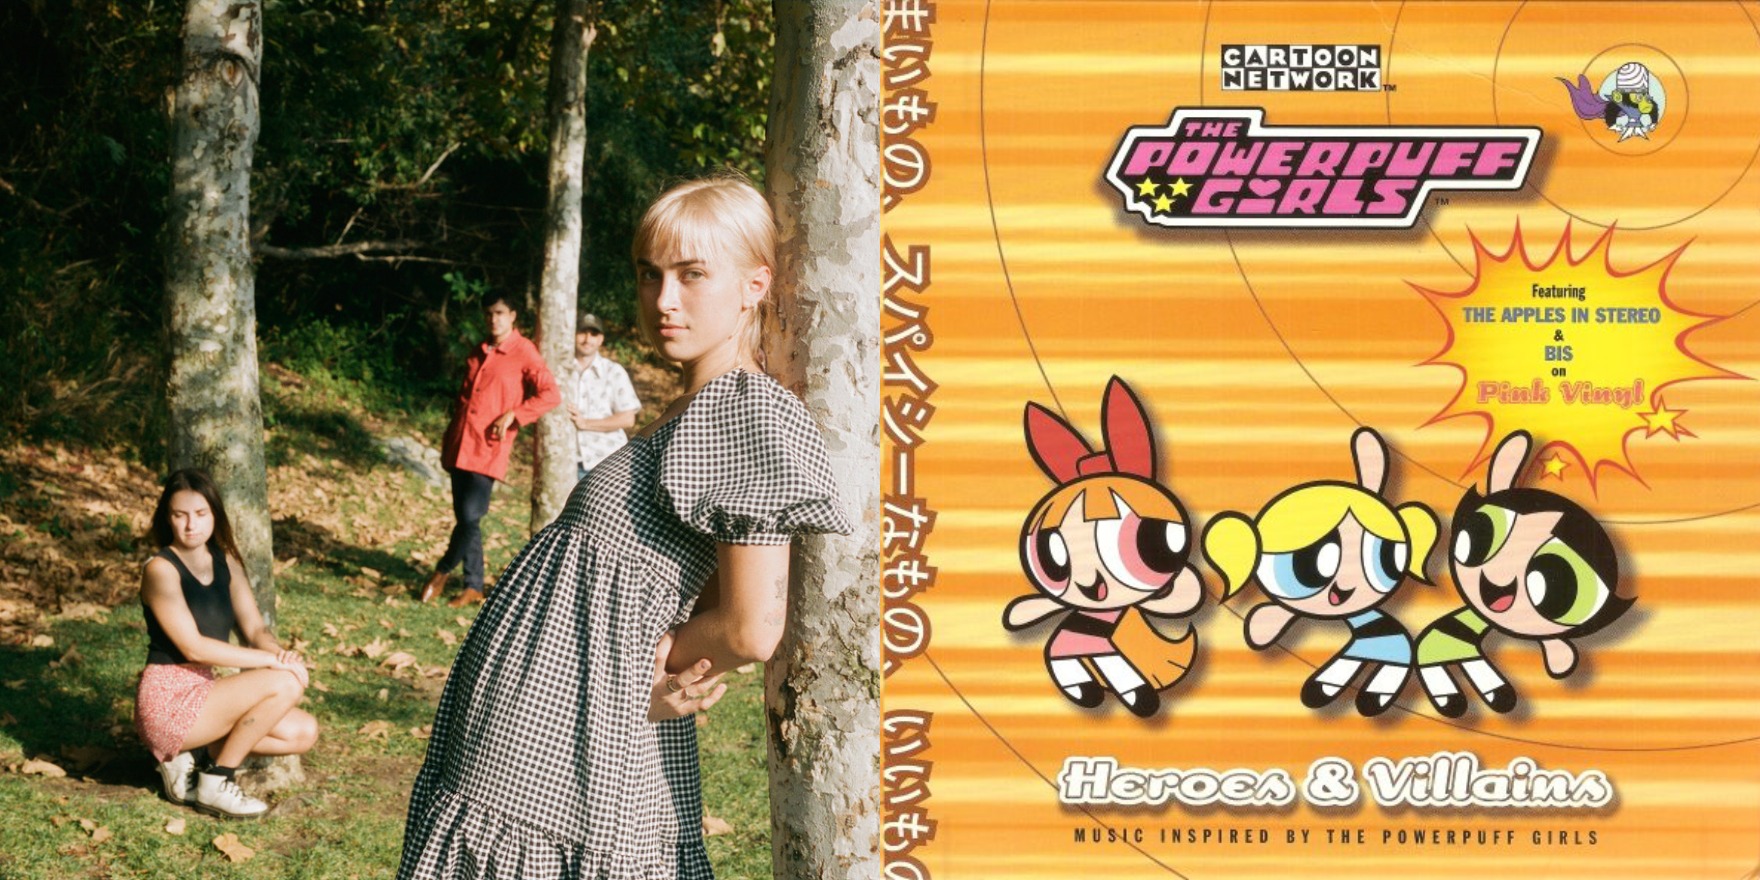 Role Models: Le Pain Found Shonen Knife and Devo on The Powerpuff Girls